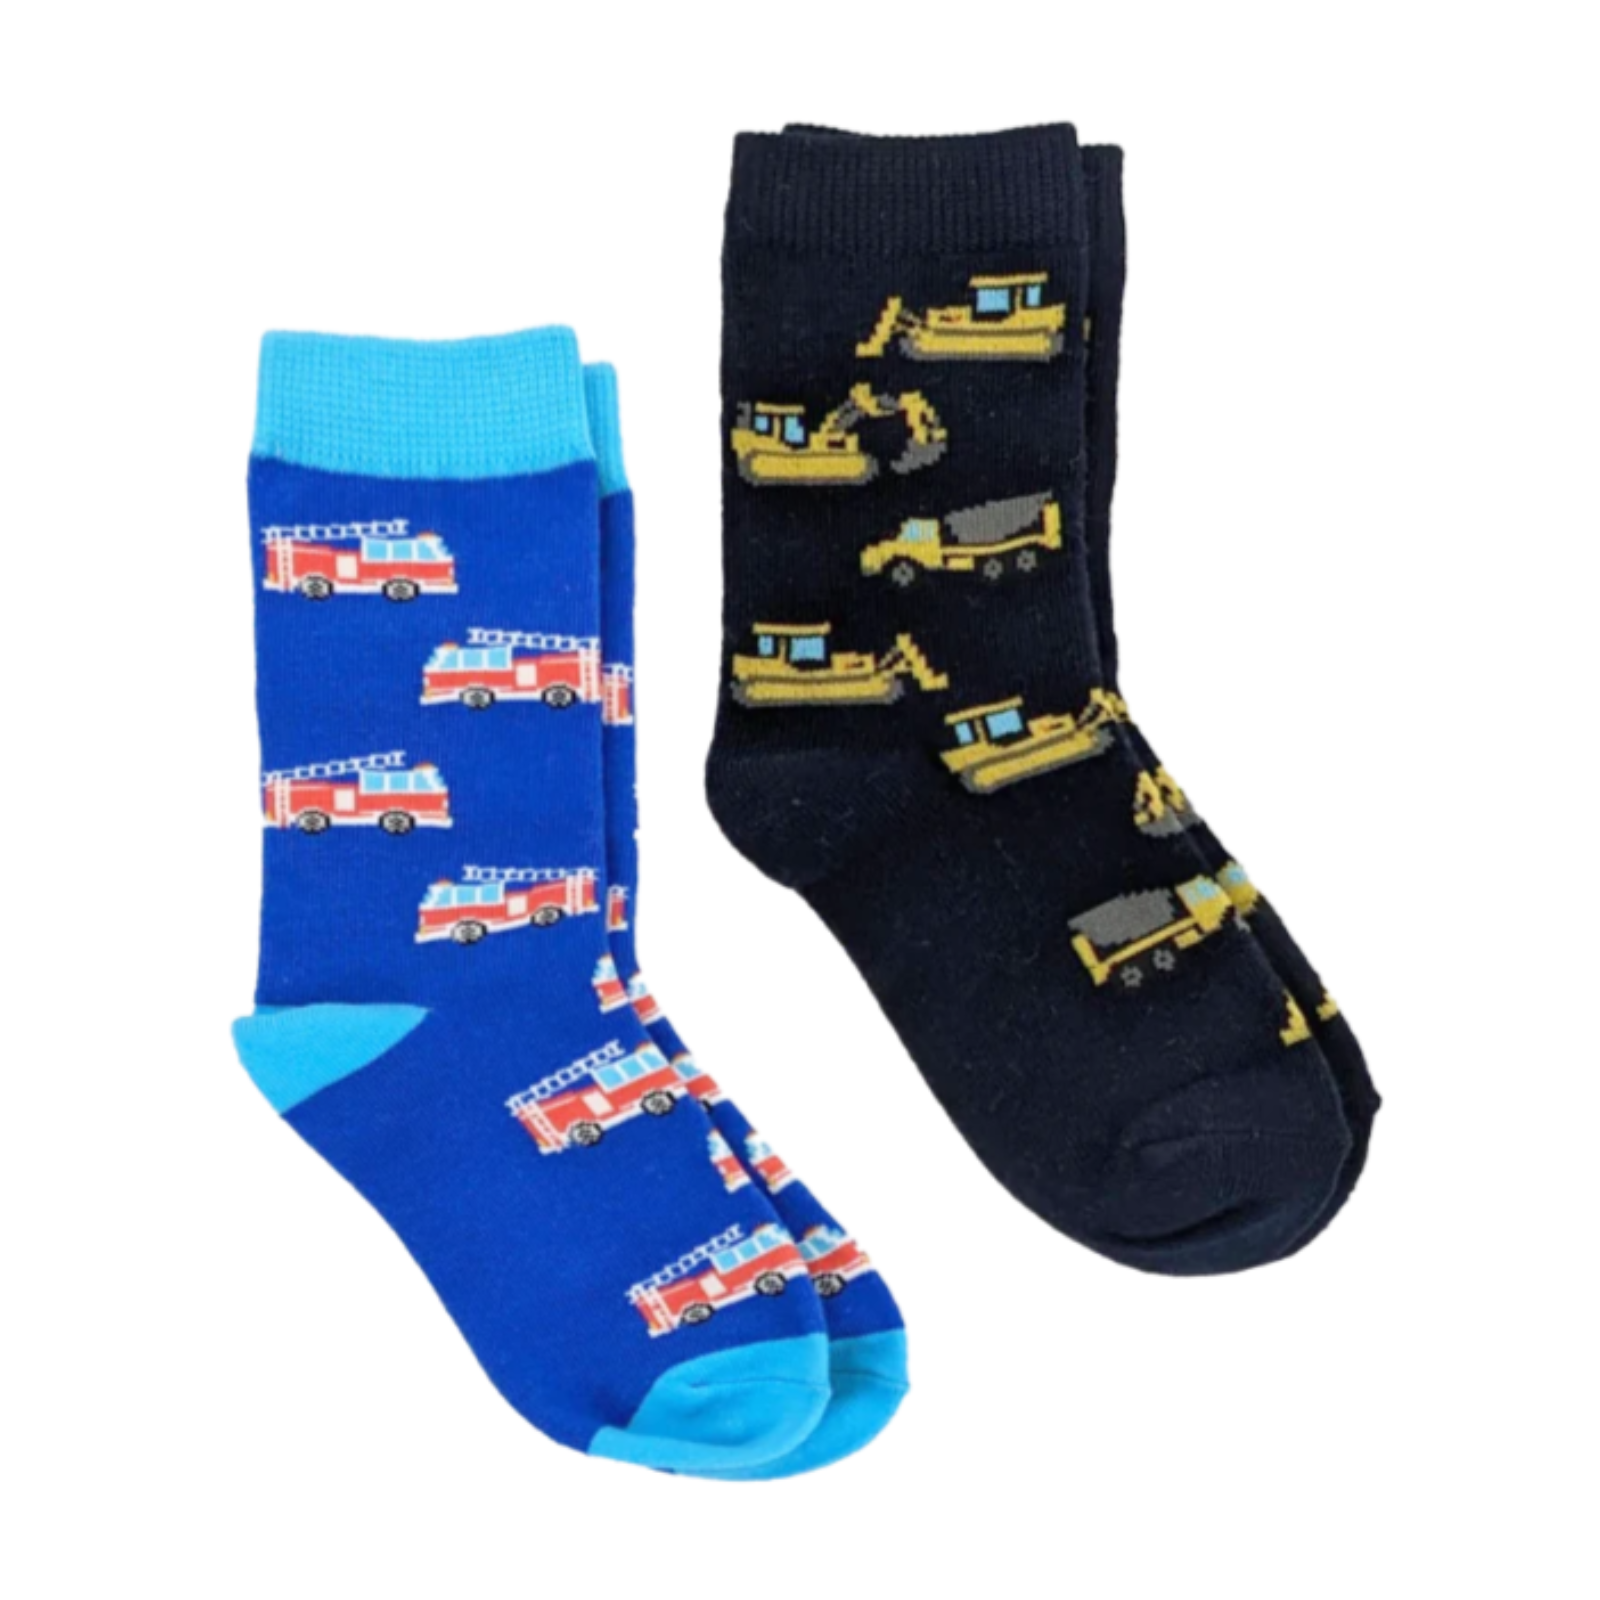 Sock Harbor Trucks 2-pack kids' crew socks featuring blue sock with red fire trucks and black sock with yellow construction trucks. Socks shown on display laying flat. 